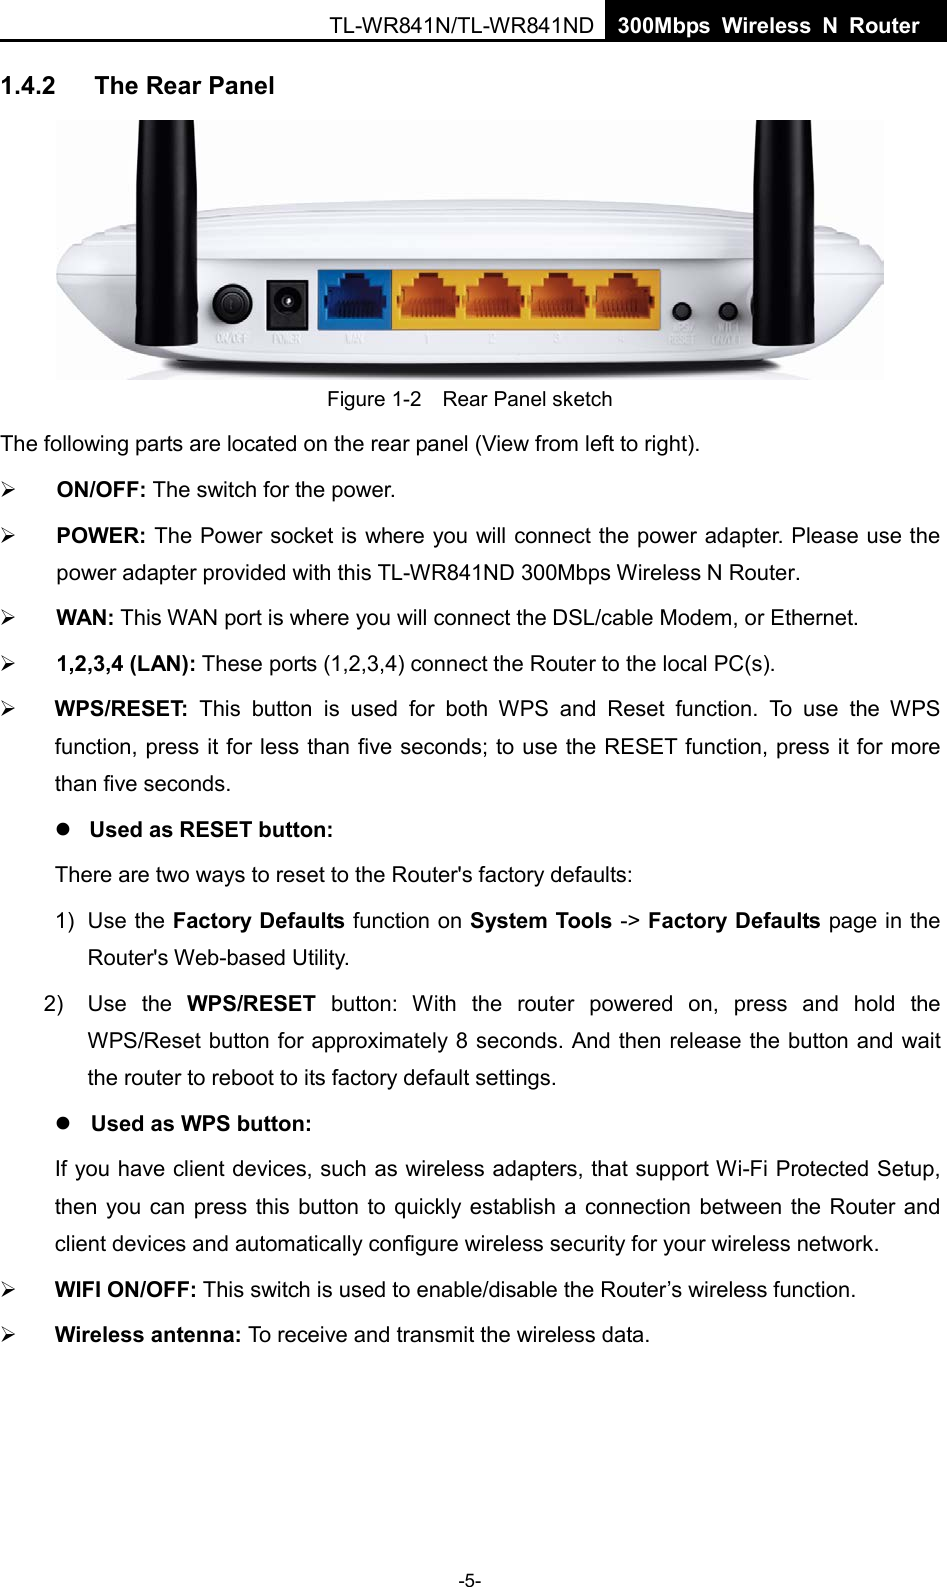  TL-WR841N/TL-WR841ND  300Mbps Wireless N Router    1.4.2 The Rear Panel  Figure 1-2    Rear Panel sketch The following parts are located on the rear panel (View from left to right).  ON/OFF: The switch for the power.  POWER: The Power socket is where you will connect the power adapter. Please use the power adapter provided with this TL-WR841ND 300Mbps Wireless N Router.  WAN: This WAN port is where you will connect the DSL/cable Modem, or Ethernet.  1,2,3,4 (LAN): These ports (1,2,3,4) connect the Router to the local PC(s).  WPS/RESET: This button is used for both WPS and Reset function. To use the WPS function, press it for less than five seconds; to use the RESET function, press it for more than five seconds.    Used as RESET button: There are two ways to reset to the Router&apos;s factory defaults: 1)  Use the Factory Defaults function on System Tools -&gt; Factory Defaults page in the Router&apos;s Web-based Utility. 2) Use the WPS/RESET button:  With the router powered on, press and hold the WPS/Reset button for approximately 8 seconds. And then release the button and wait the router to reboot to its factory default settings.  Used as WPS button: If you have client devices, such as wireless adapters, that support Wi-Fi Protected Setup, then you can press this button to quickly establish a connection between the Router and client devices and automatically configure wireless security for your wireless network.  WIFI ON/OFF: This switch is used to enable/disable the Router’s wireless function.  Wireless antenna: To receive and transmit the wireless data. -5- 